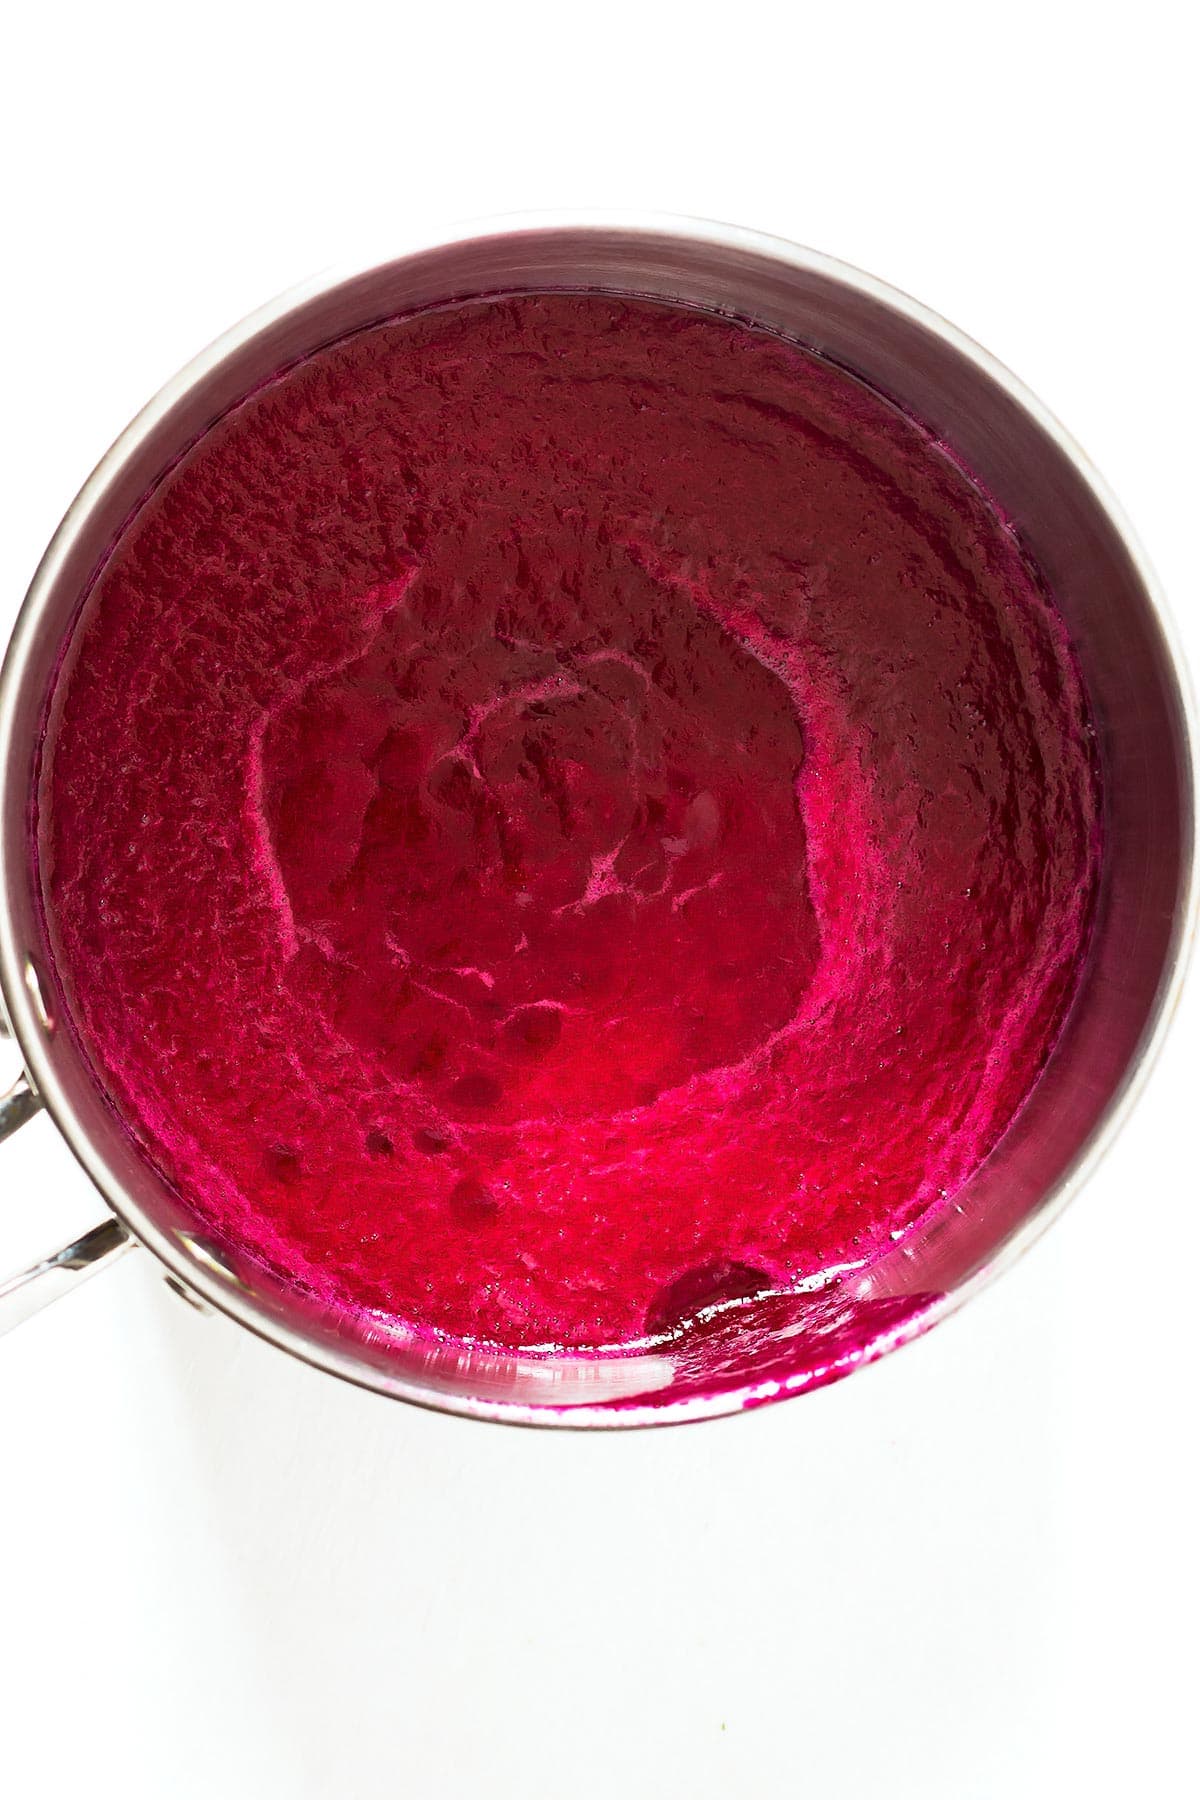 Prickly Pear Syrup in saucepan